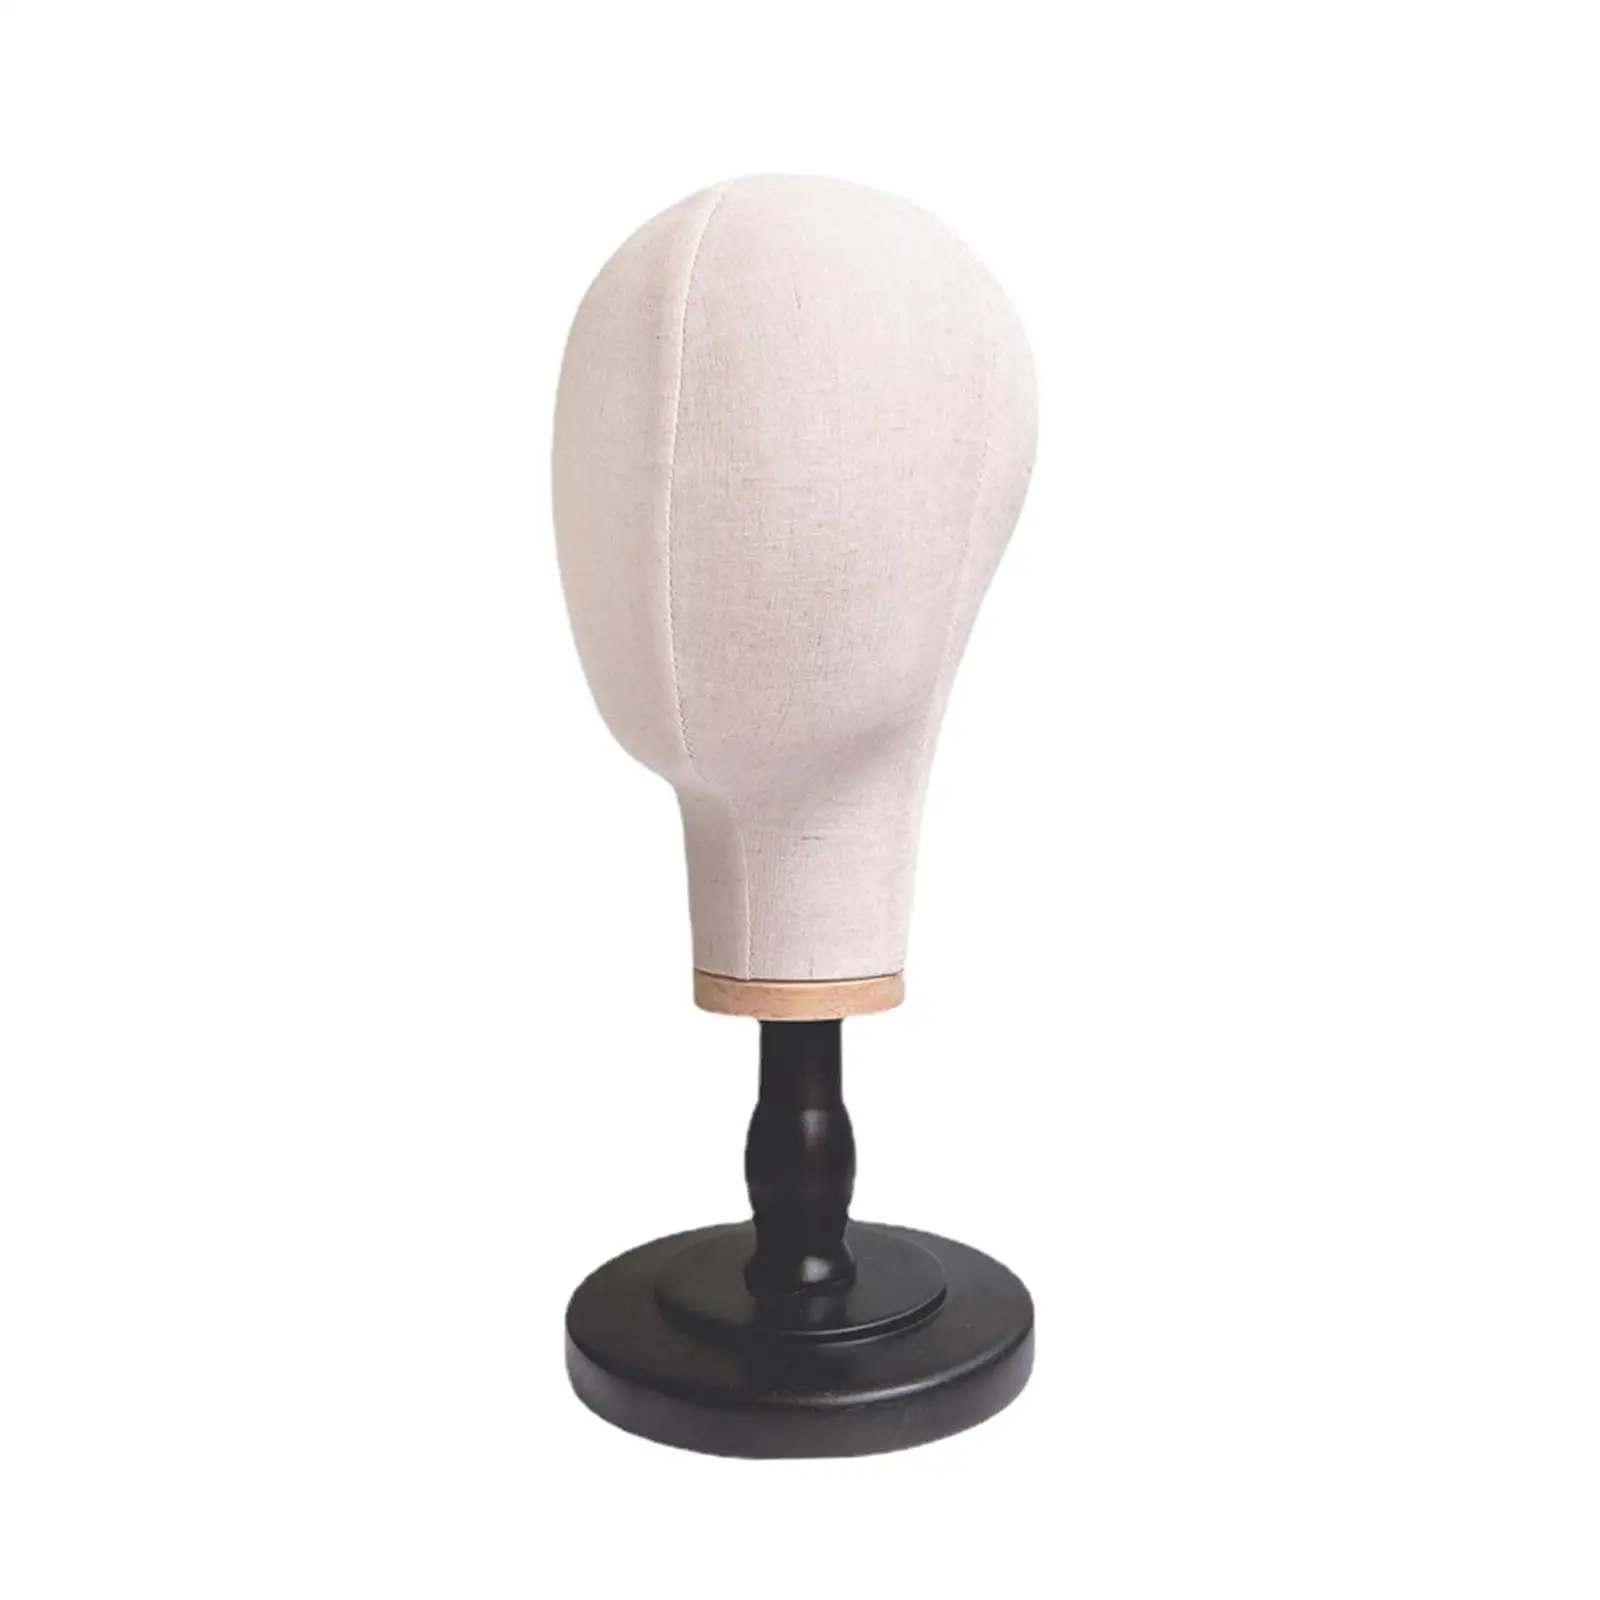 Mannequin Head Model Sturdy Canvas Block Head for Glasses Headset Jewelry